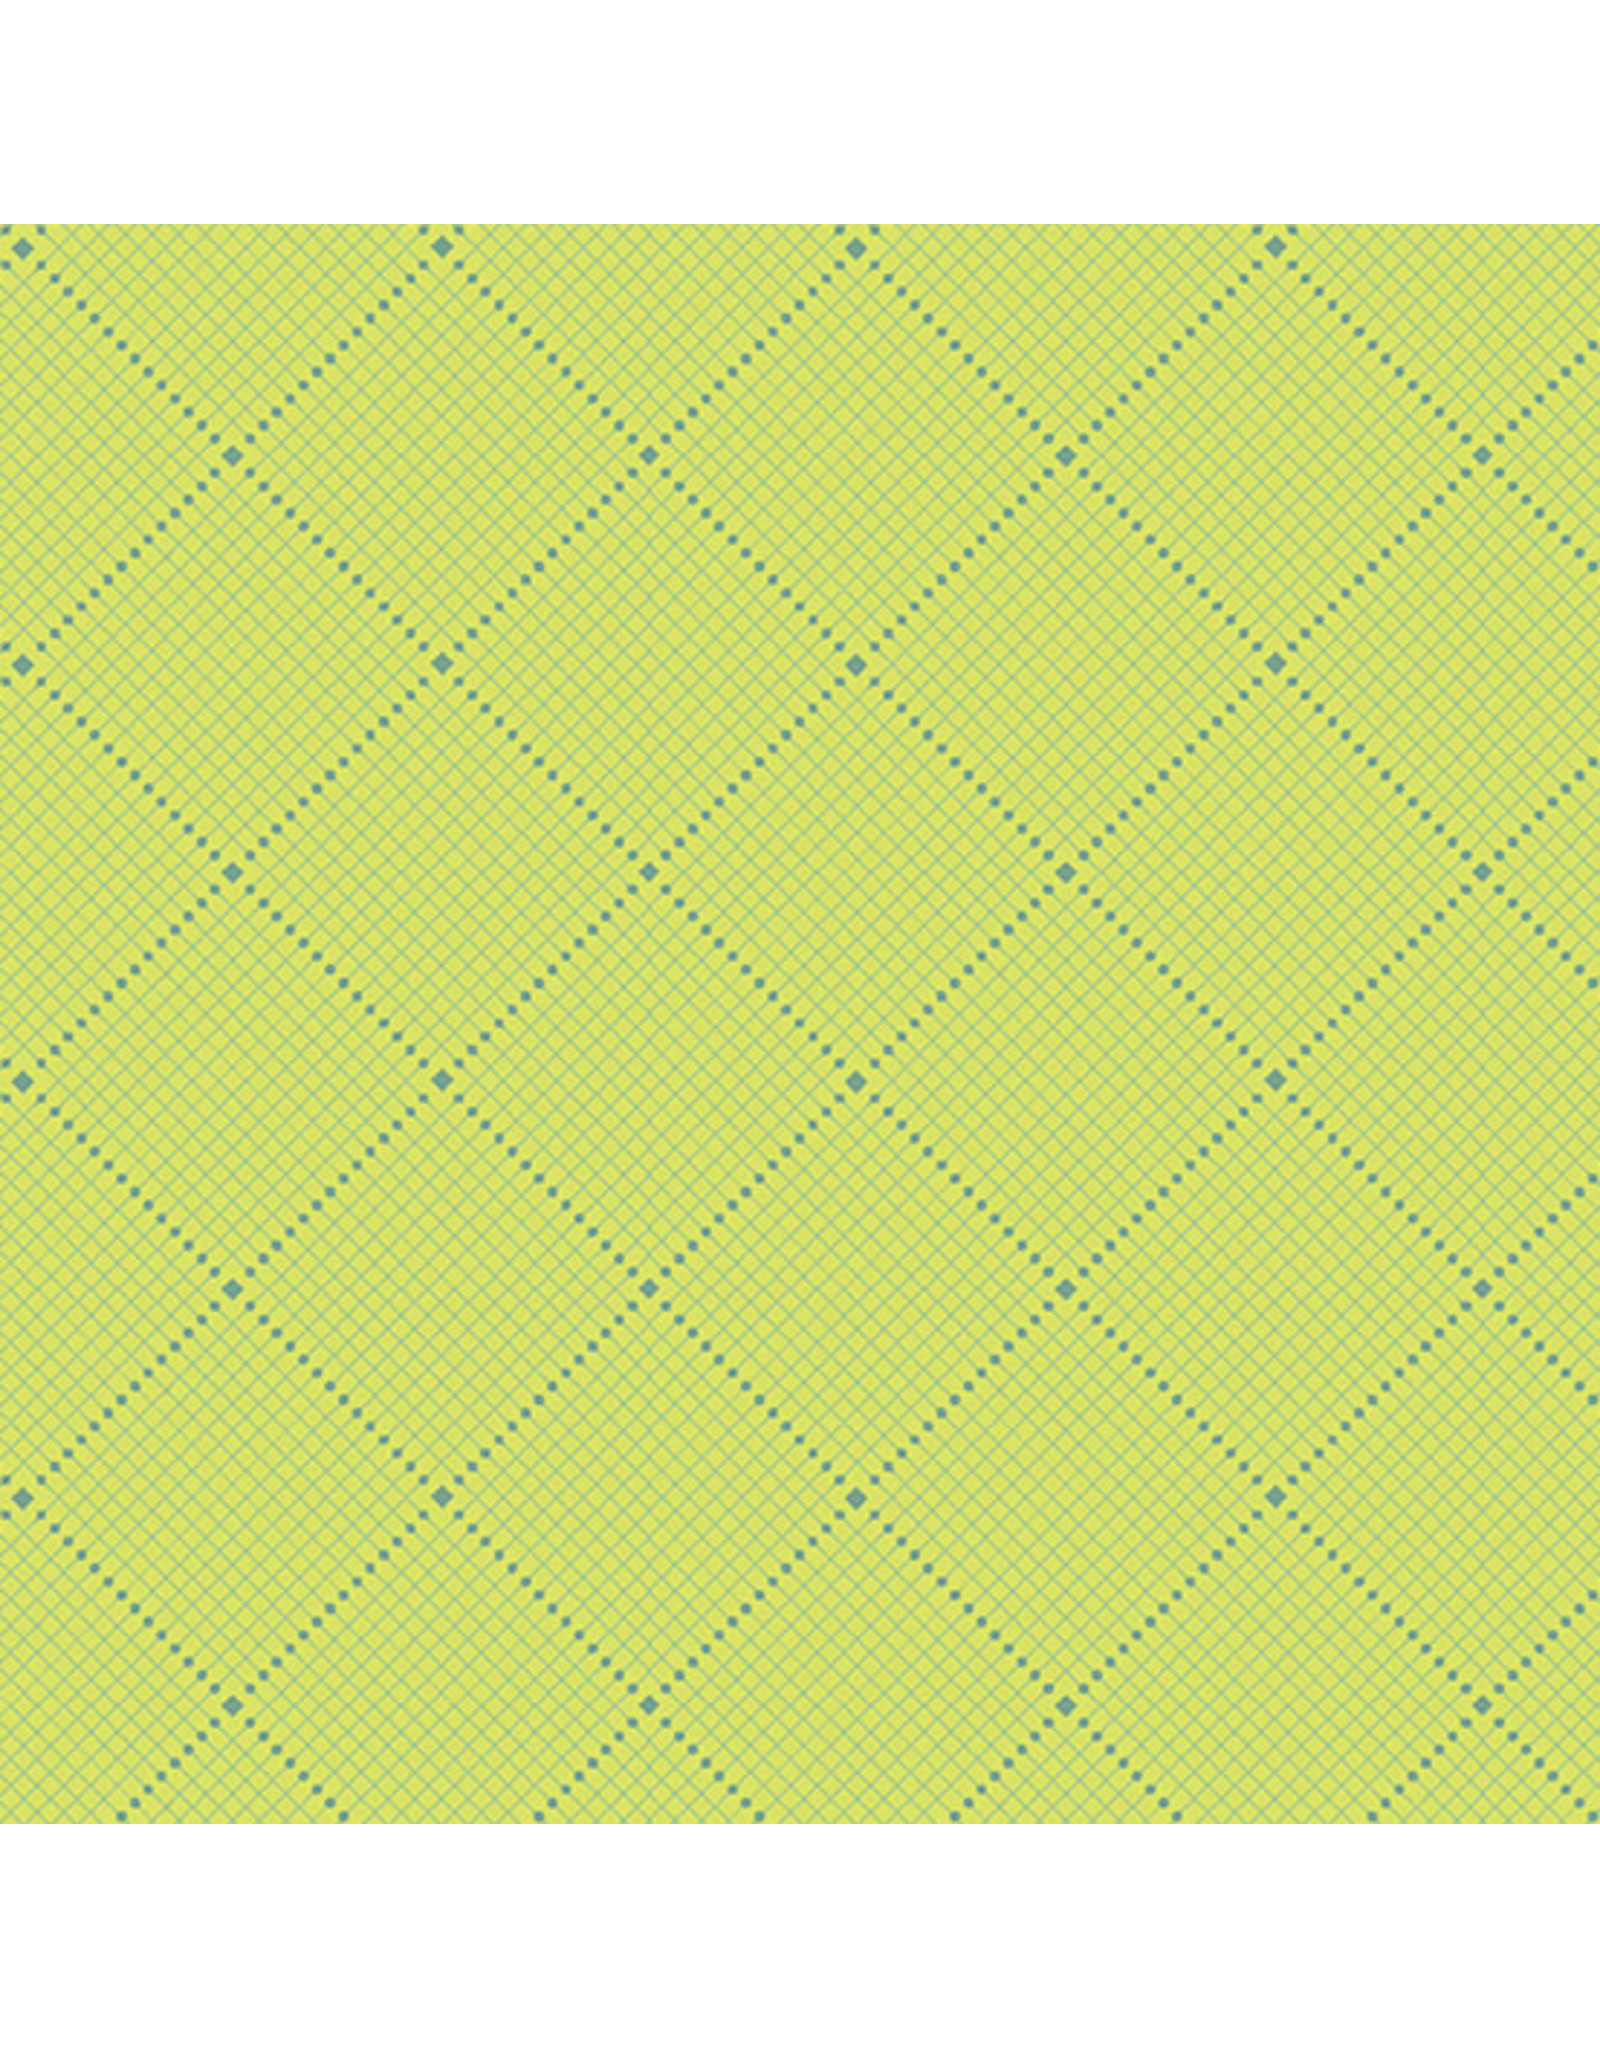 Andover Giucy Giuce - Fabric from the Attic - Gridlock Celery - A-9984-G